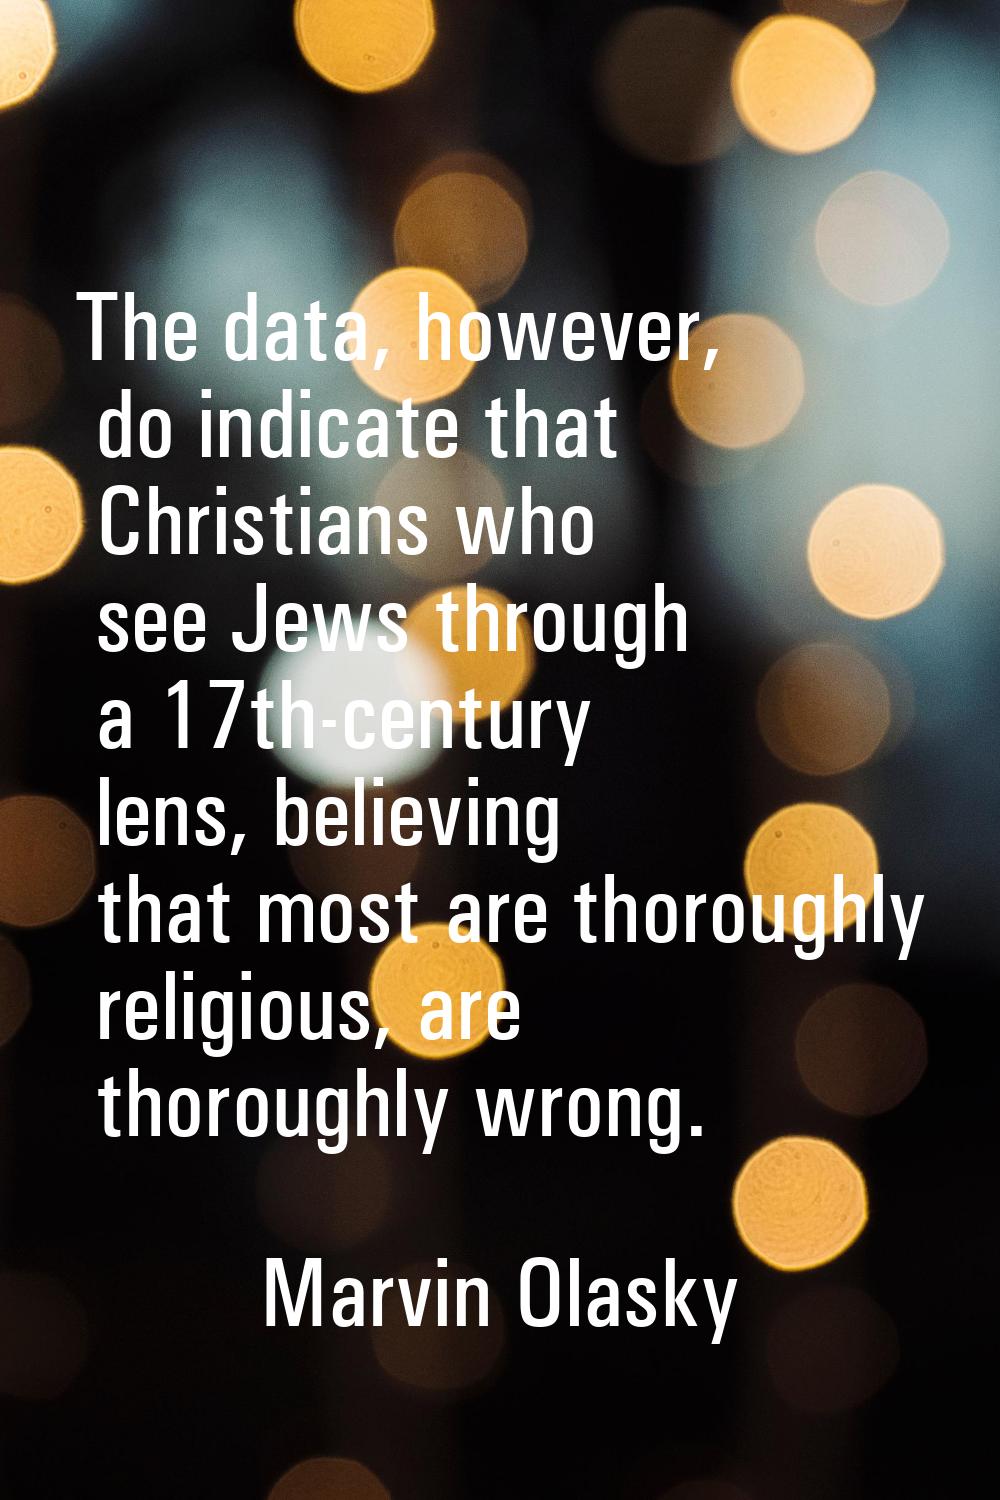 The data, however, do indicate that Christians who see Jews through a 17th-century lens, believing 